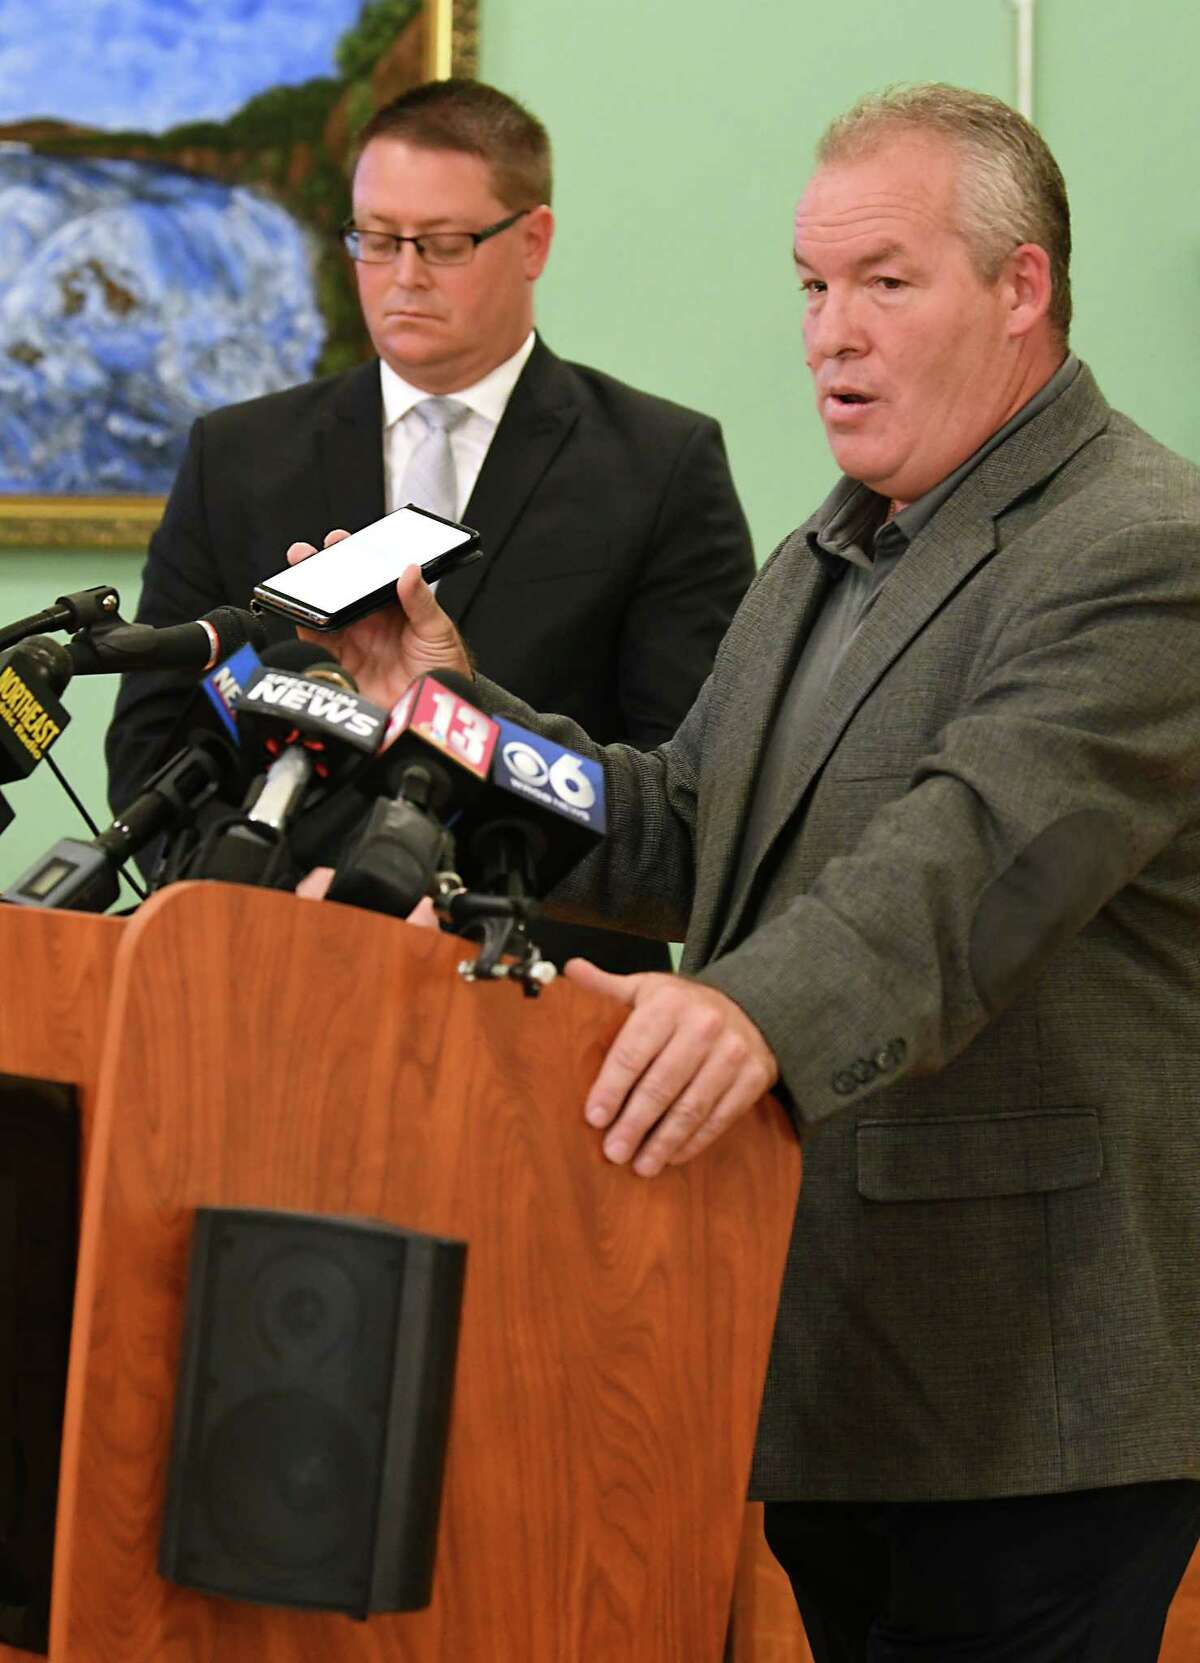 Cohoes Mayor Shawn Morse plays an audio of his upset wife from his cell phone as holds a press conference to speak out about the latest allegations and what's been going on with his family's life at Cohoes City Hall on Monday, Sept. 17, 2018 in Cohoes, N.Y. Morse said he doesn't plan on stepping down from his job. His attorney Joseph Ahearn listens at left. (Lori Van Buren/Times Union)